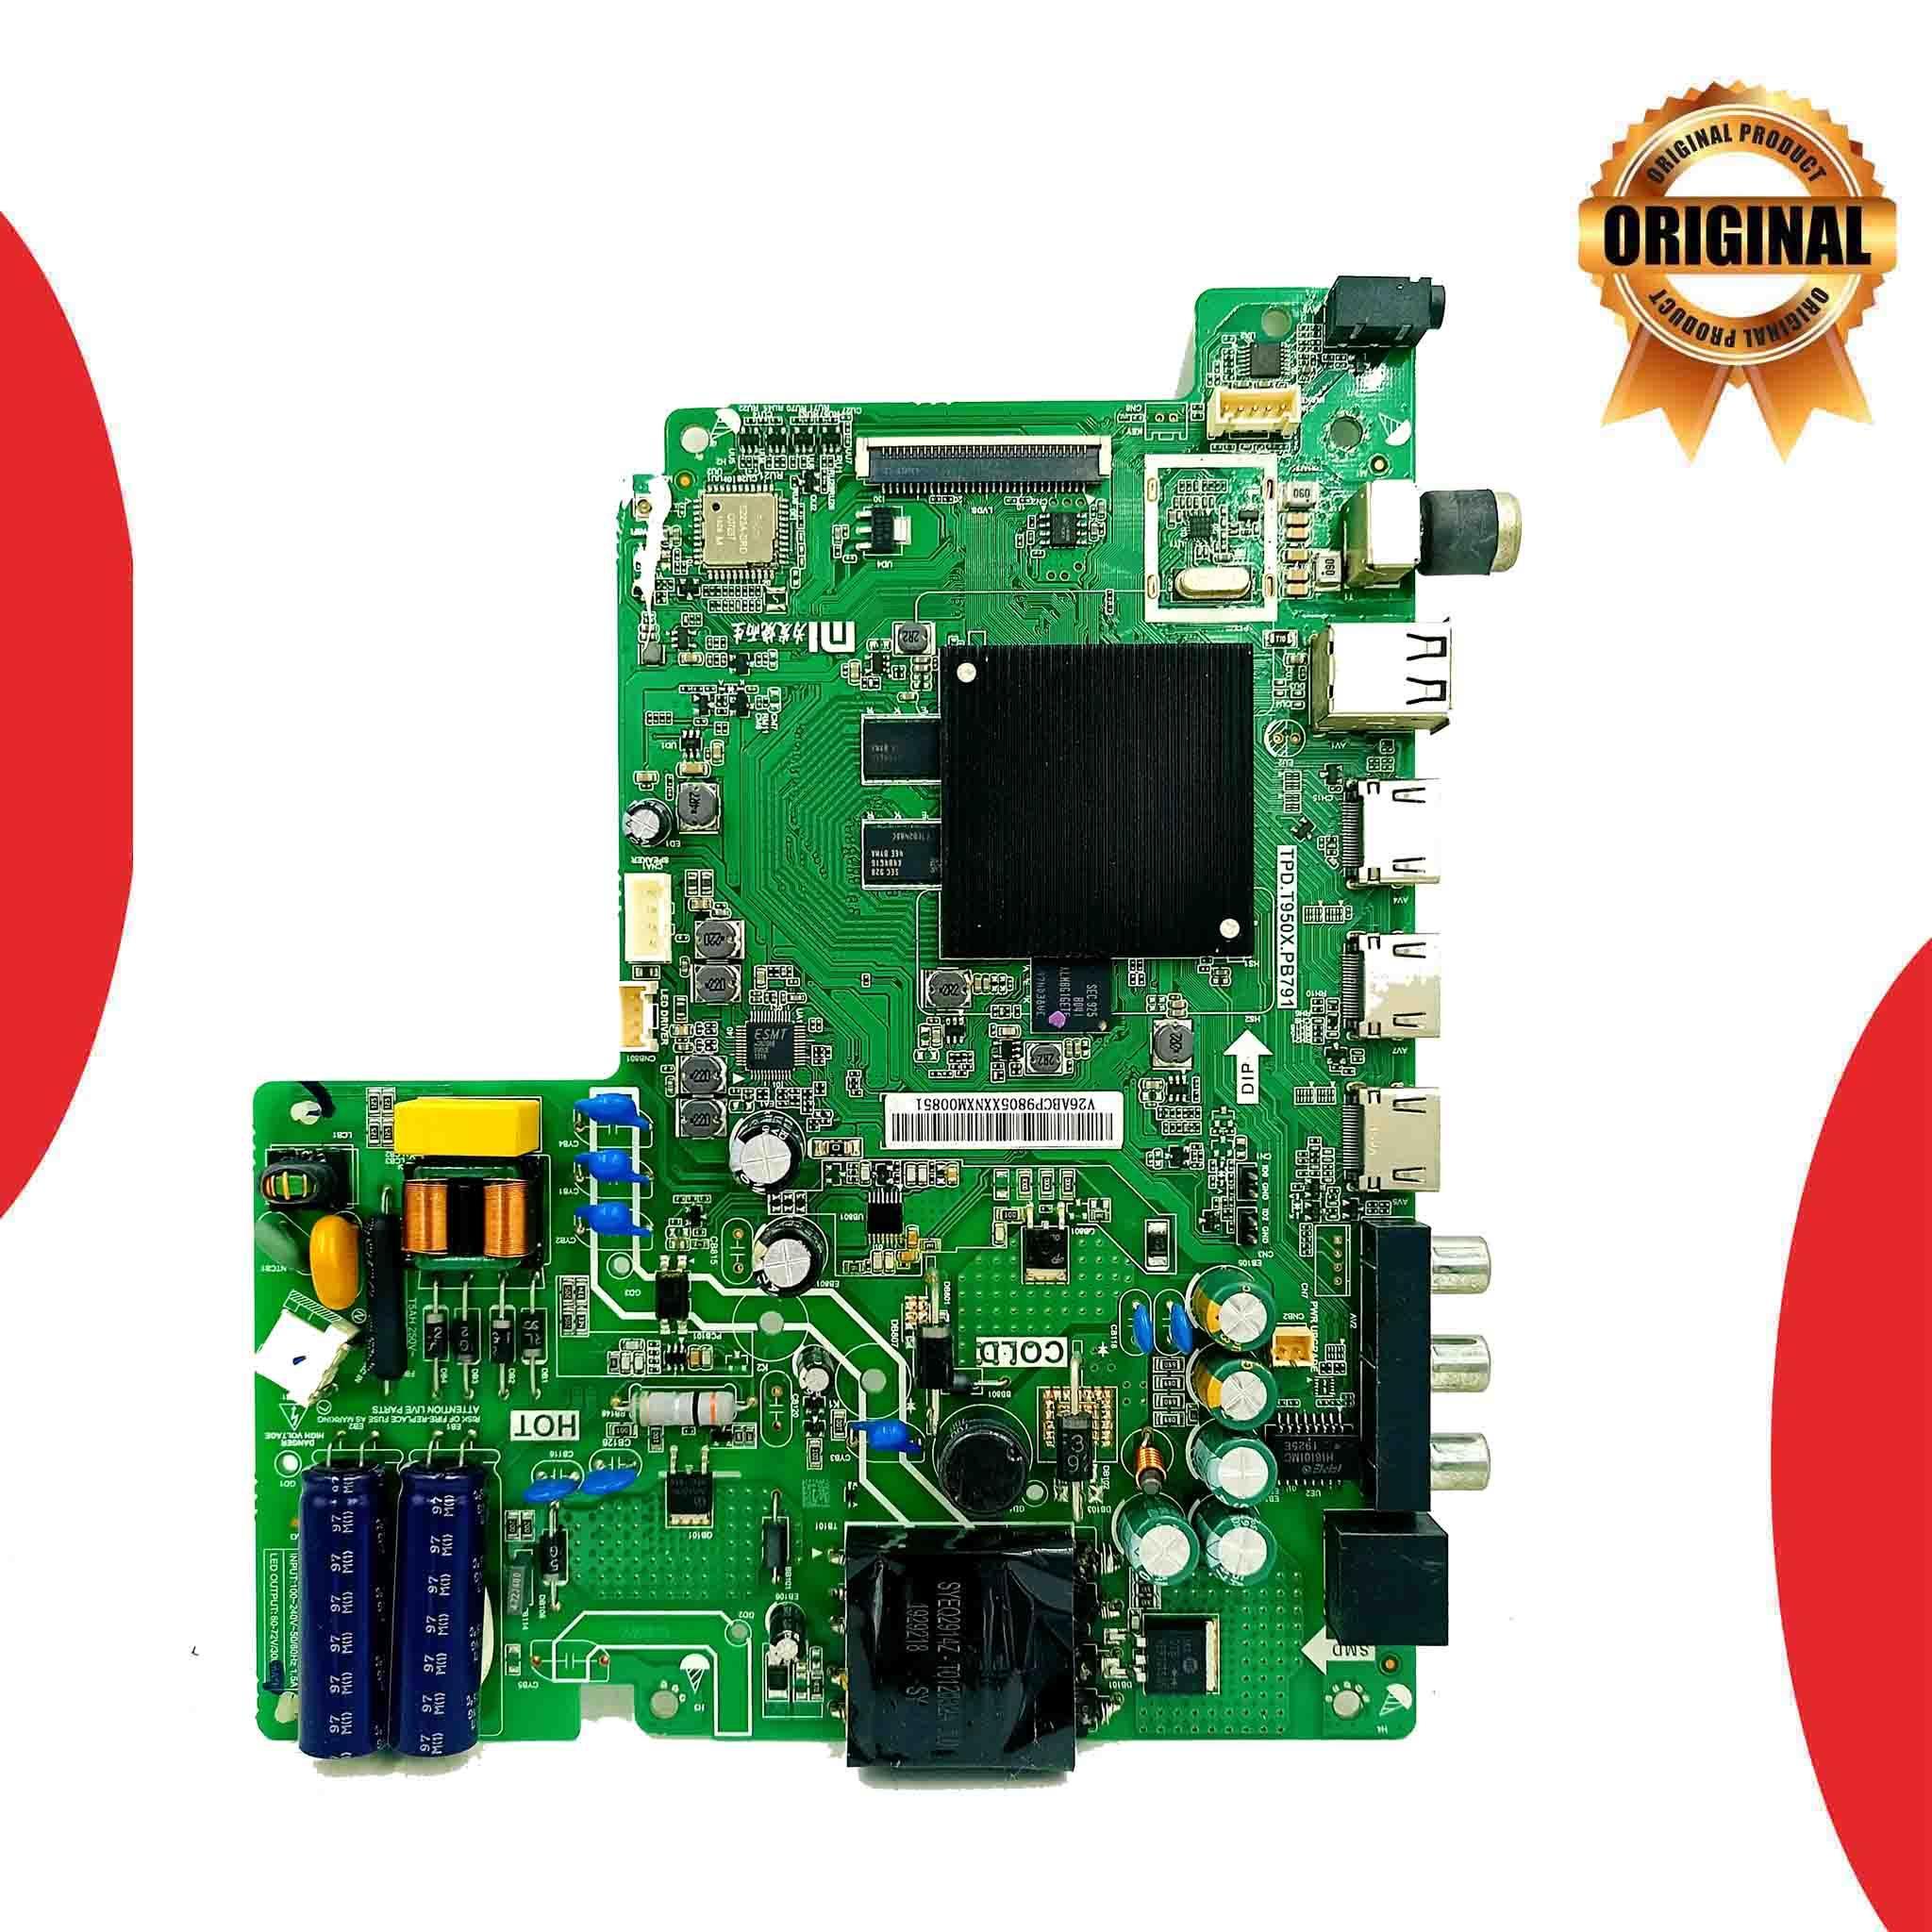 MI 32 inch LED TV Motherboard for Model L32M5-AN - Great Bharat Electronics